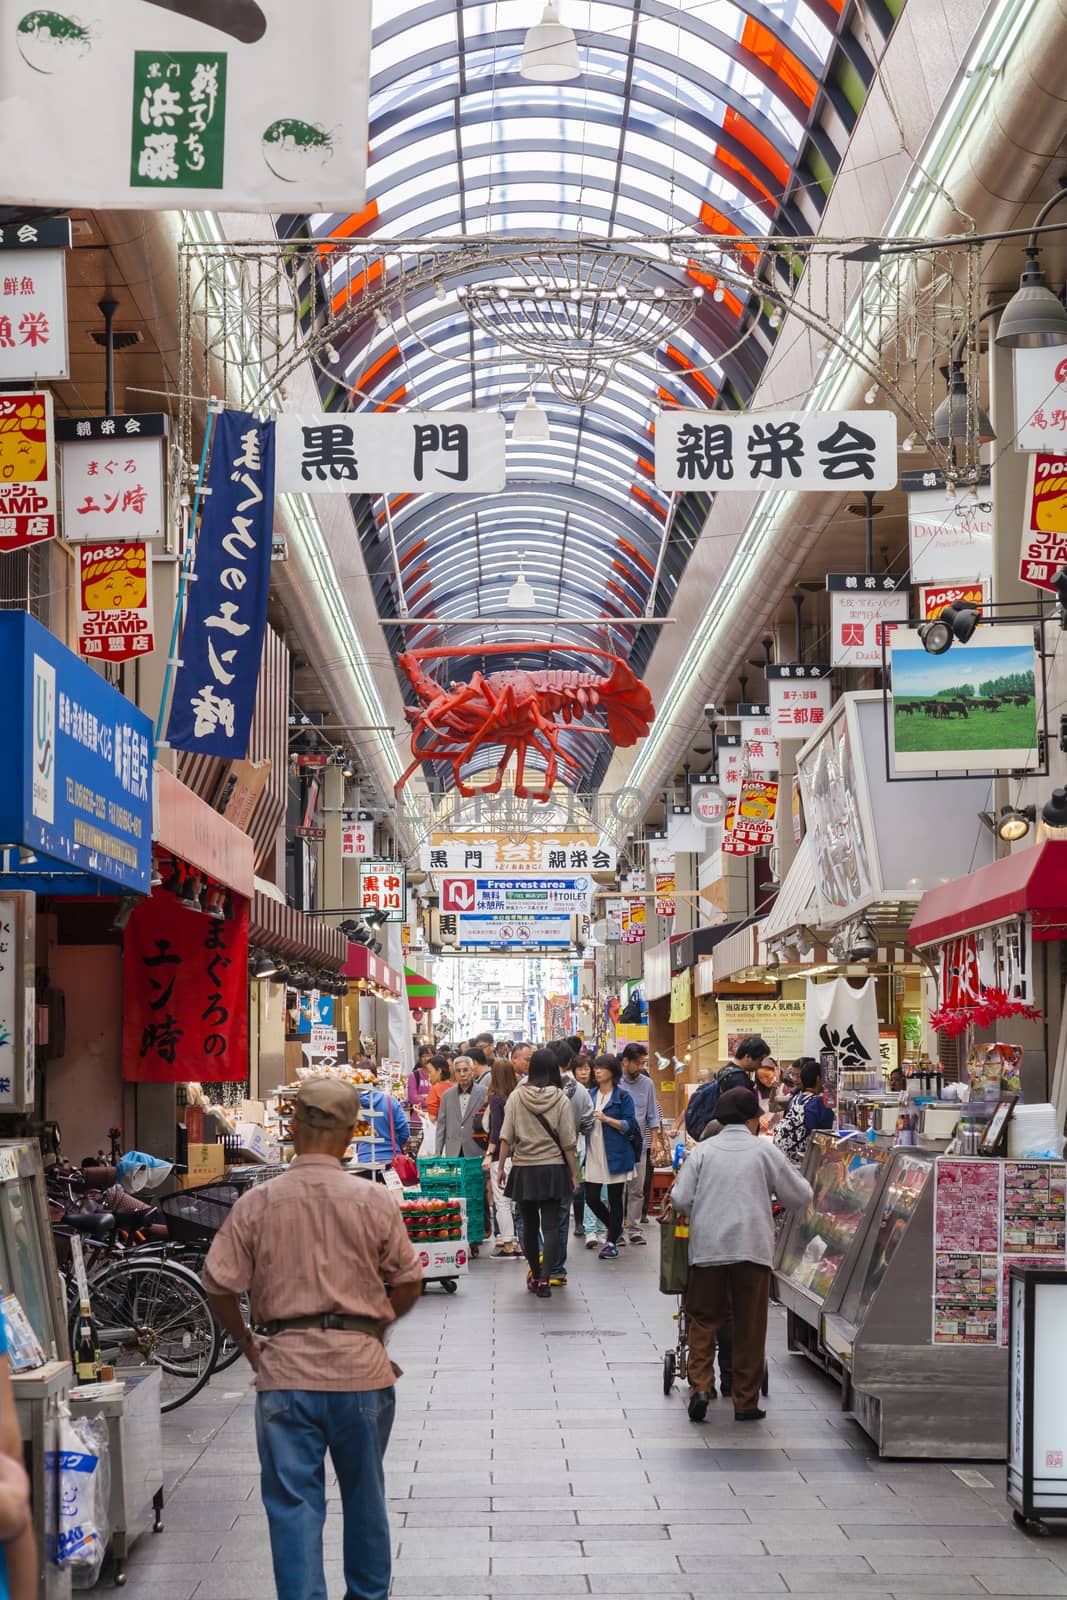 Osaka, Japan - Oct 26: People shopping in the Kuromon Market in Osaka, Japan on Oct 26, 2014.  The Kuromon Market has been called 'Osaka's Kitchen' since it opened as many cooks in Osaka come here to get the ingredients.